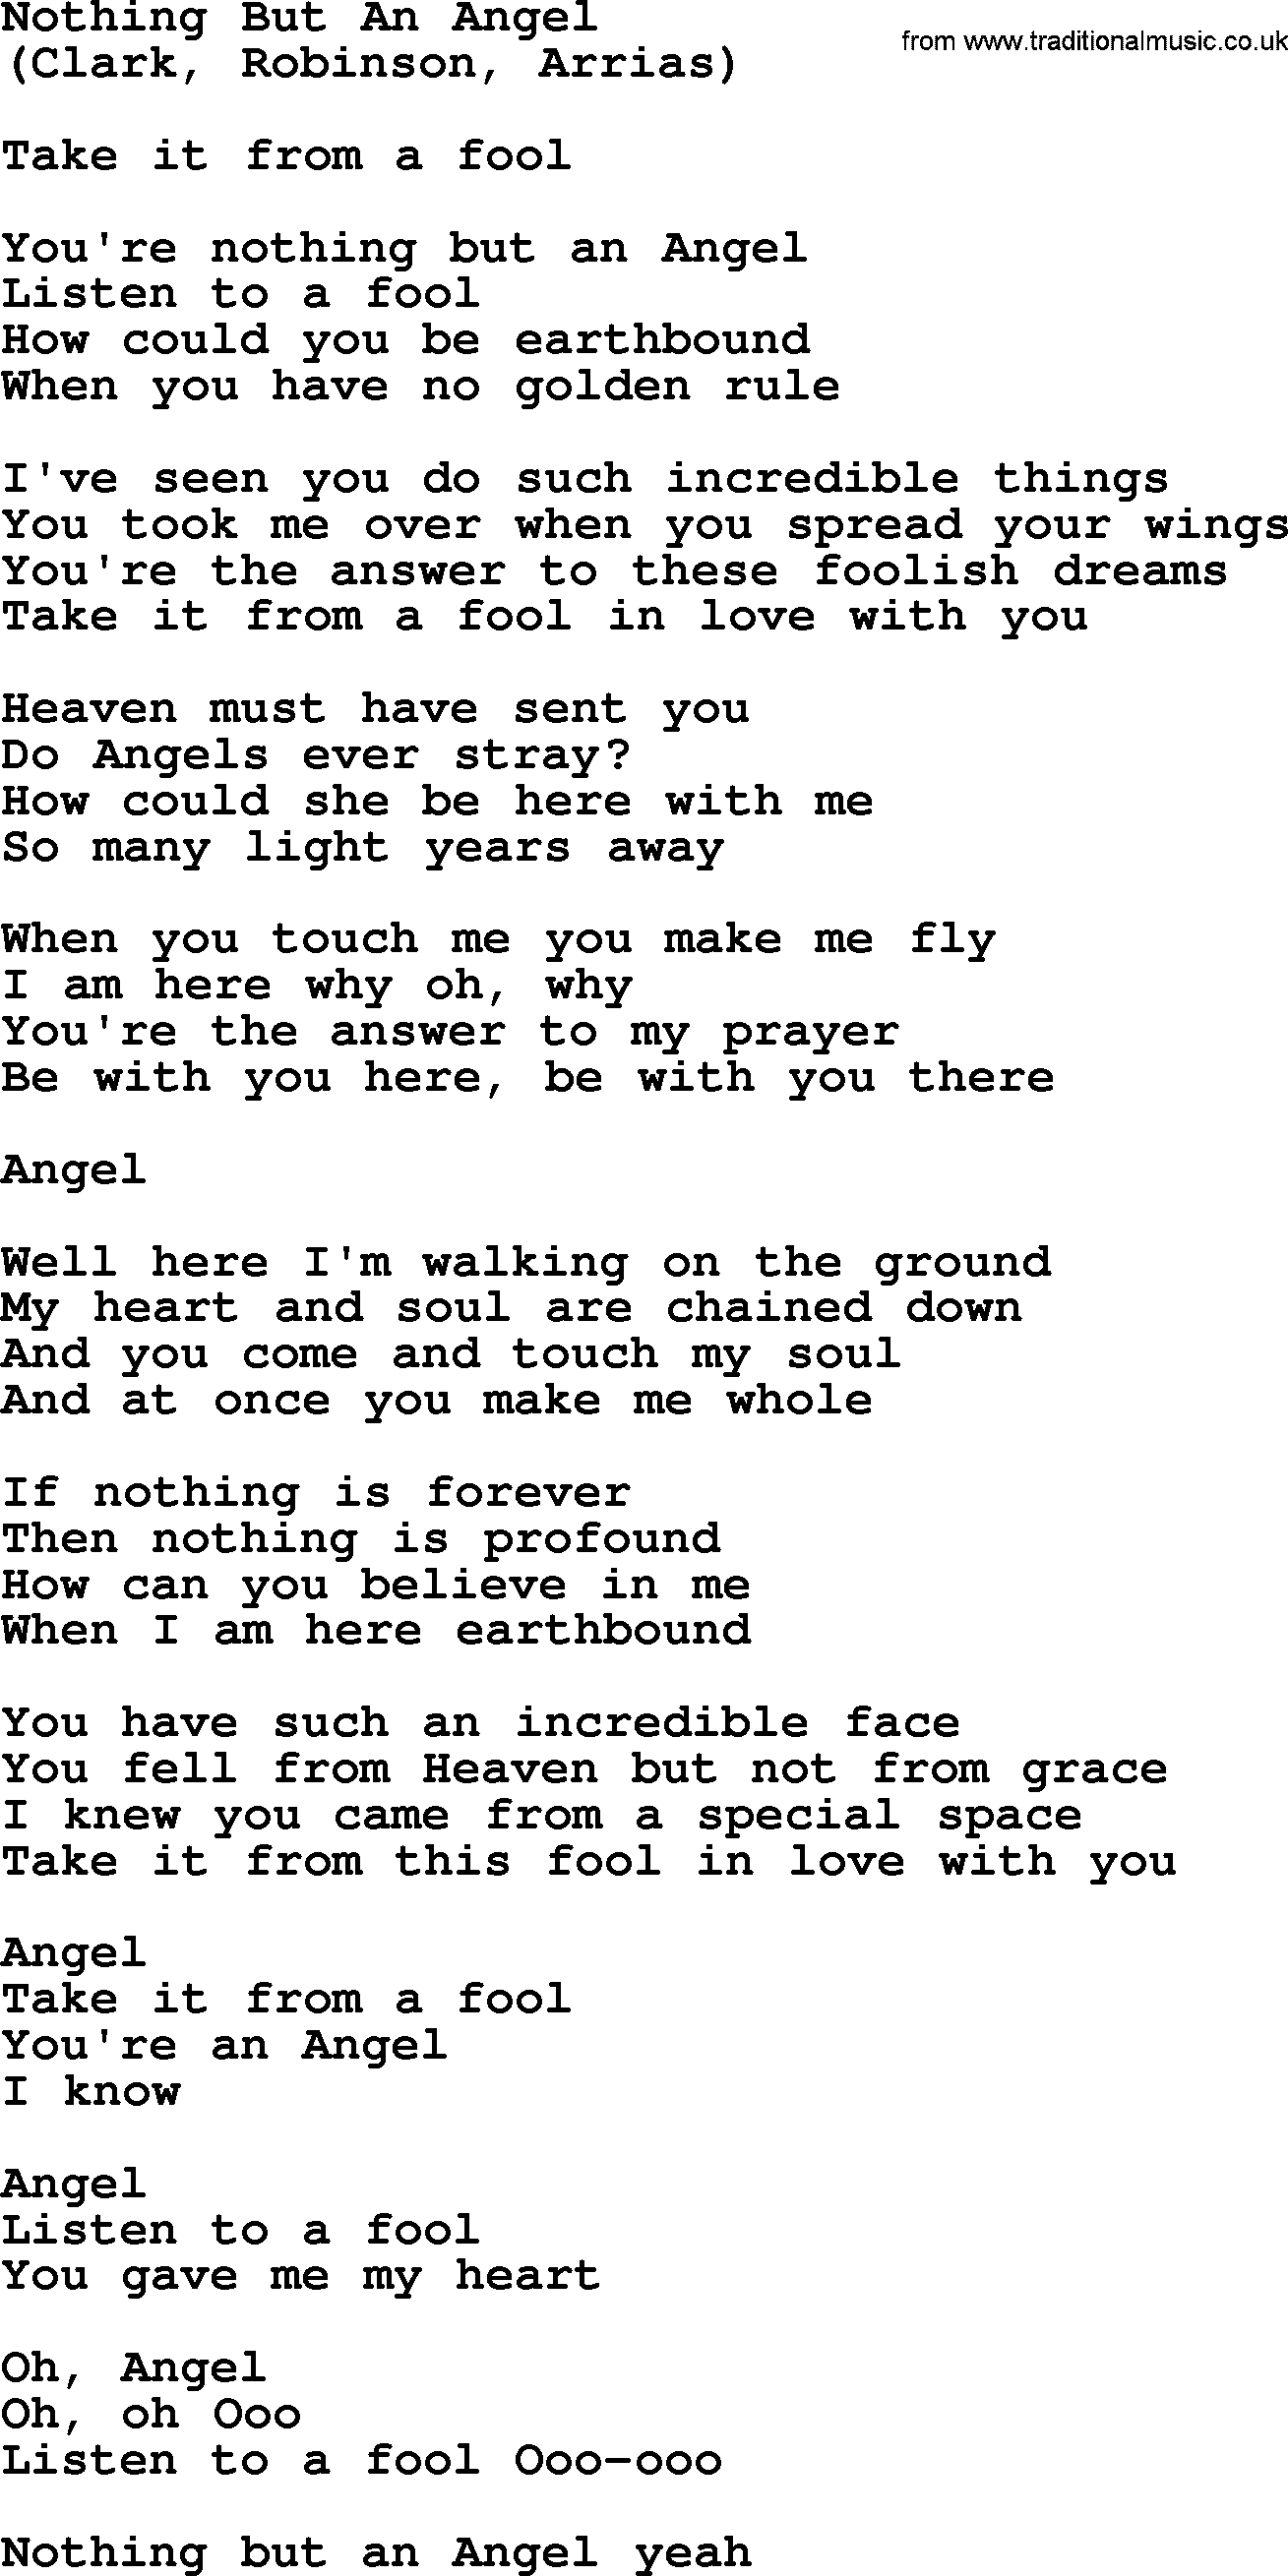 The Byrds song Nothing But An Angel, lyrics